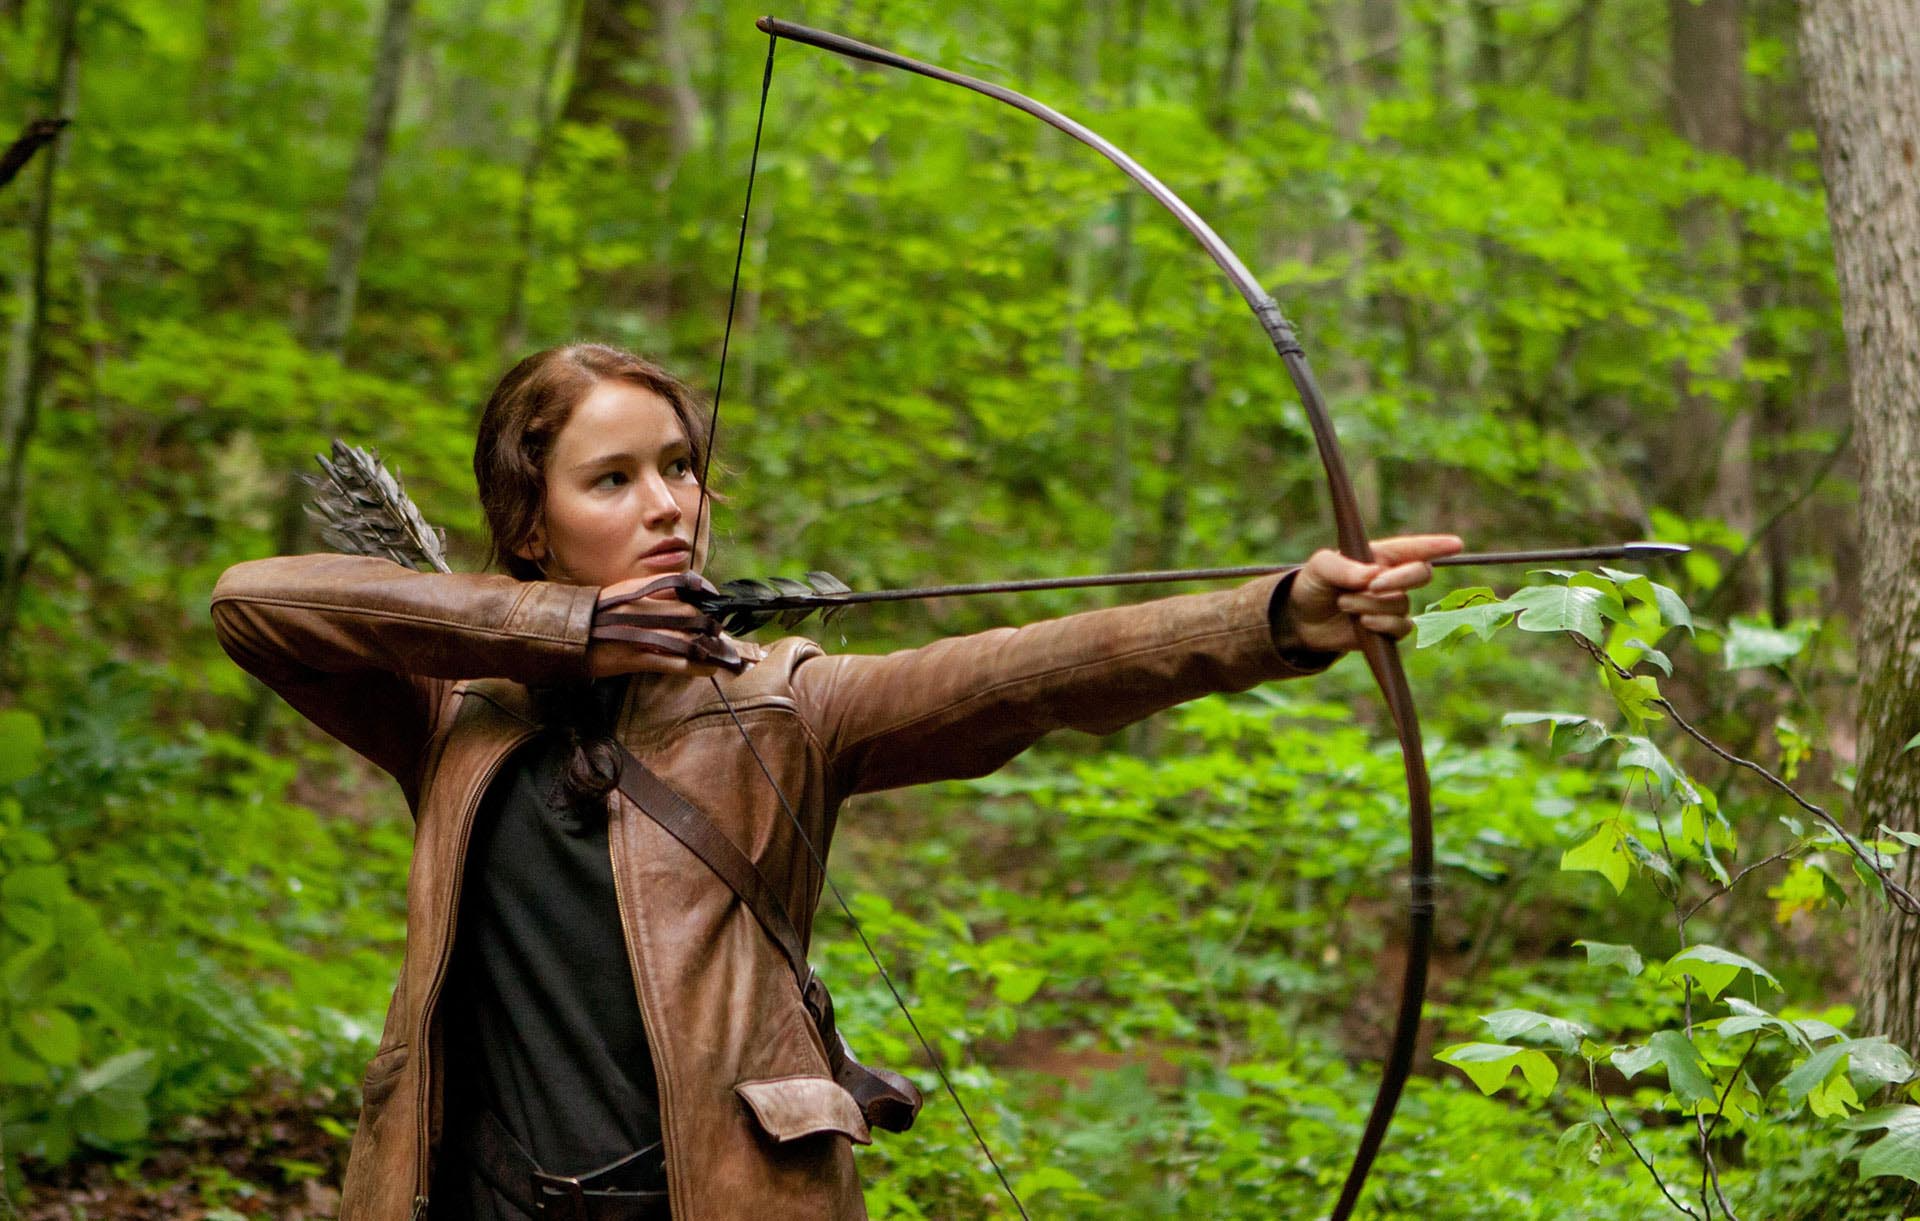 Watch The Hunger Games: Catching Fire Streaming Online